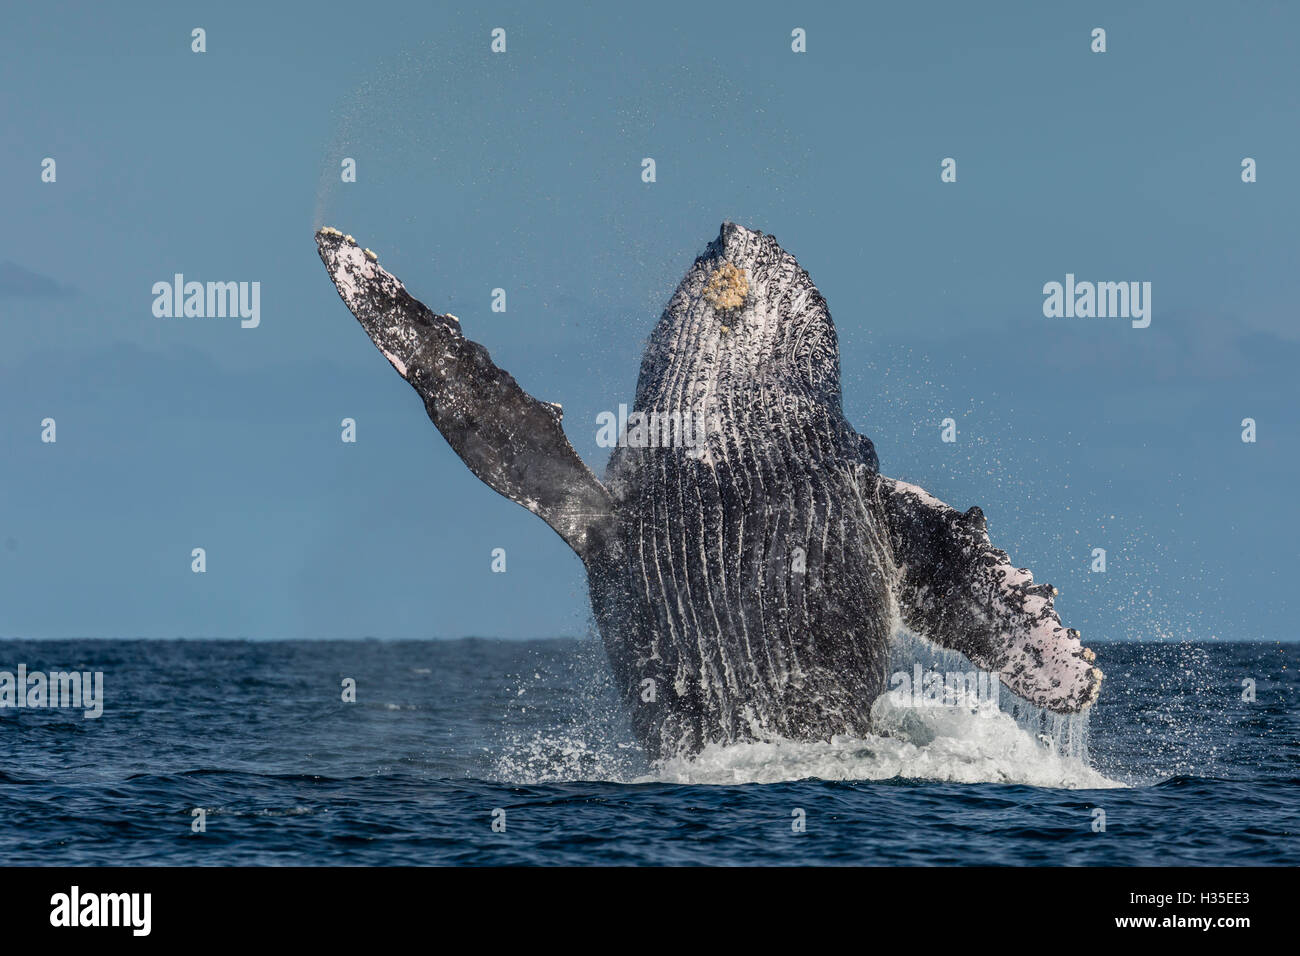 Adult humpback whale (Megaptera novaeangliae), breaching in the shallow waters of Cabo Pulmo, Baja California Sur, Mexico Stock Photo